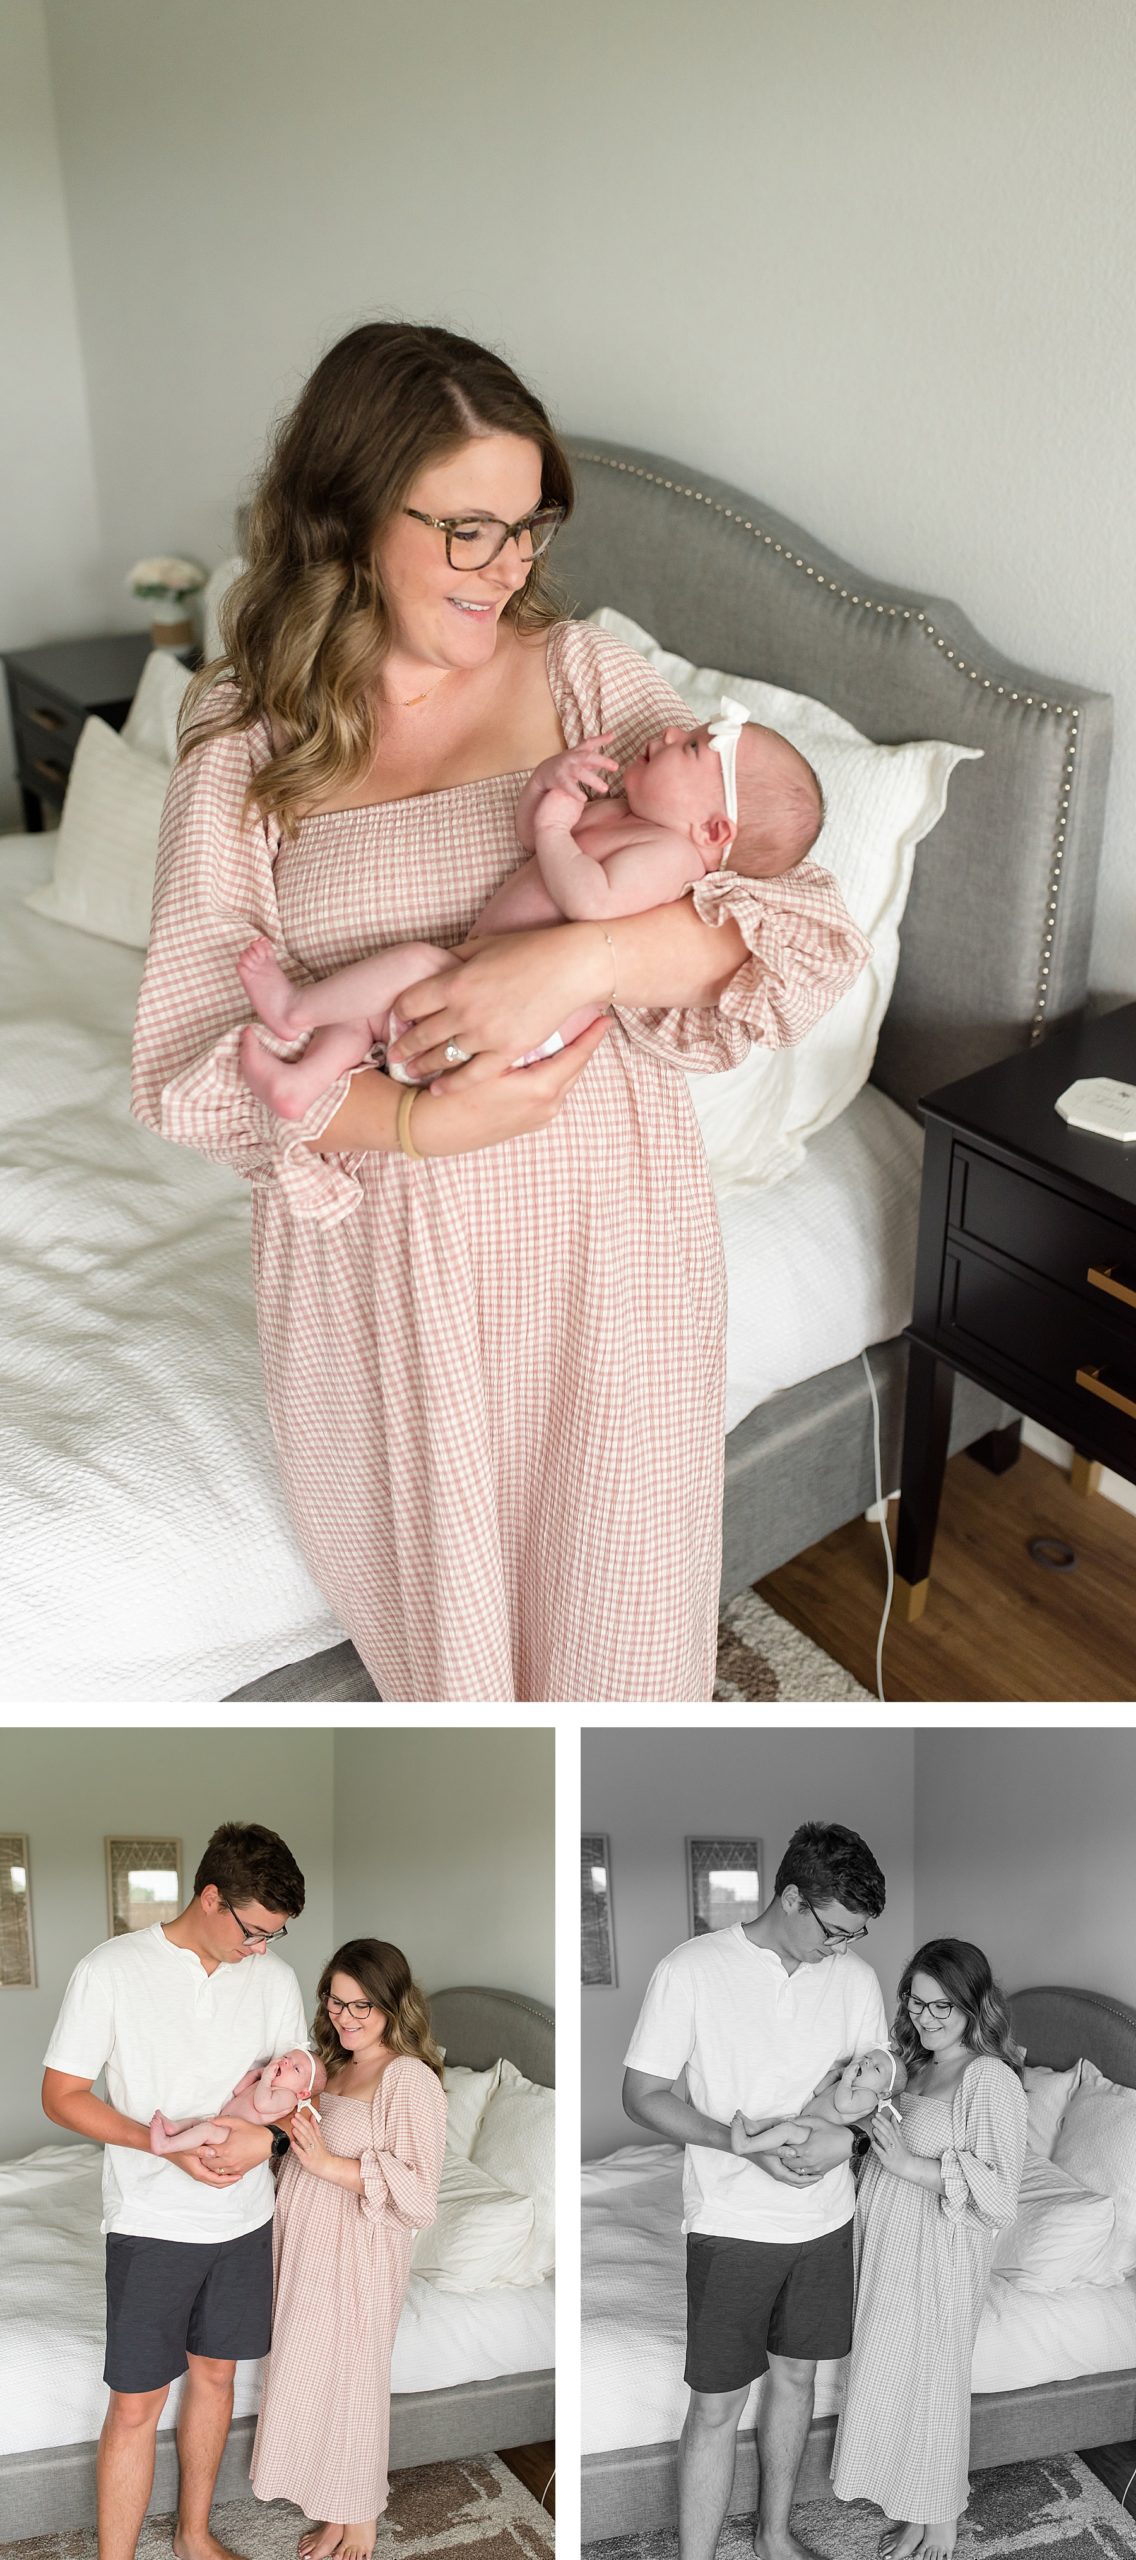 Mom with daughter during in-home newborn session | Lindsey Dutton Photography | newborn photos, family photos at home, neutral family outfits | via lindseyduttonphotography.com